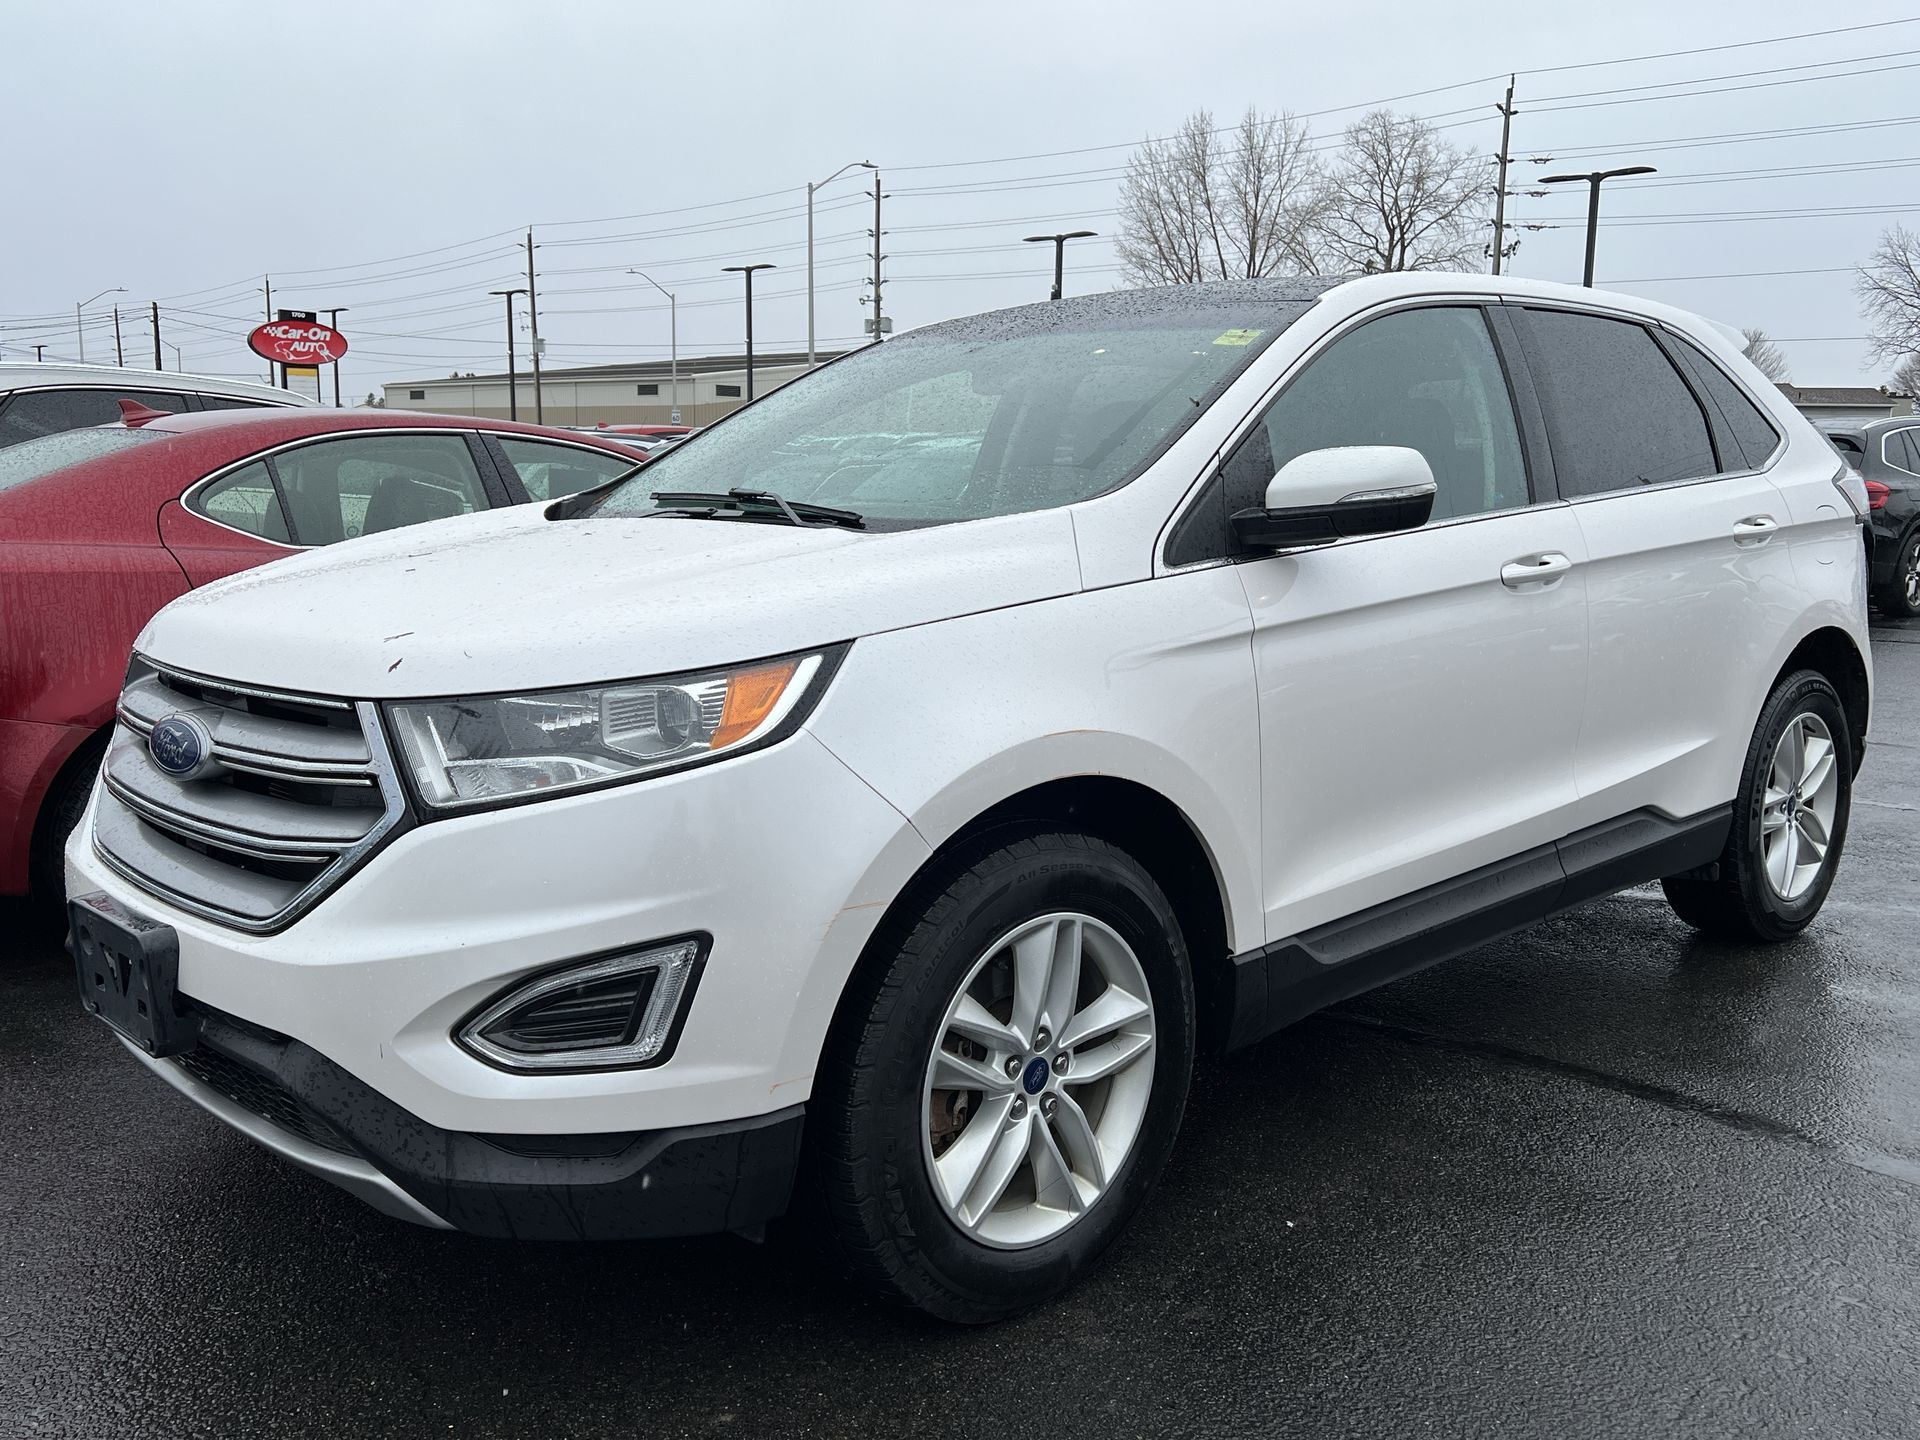 2018 Ford Edge SEL AWD | 3.5L V6 | HTD LEATHER | PANO ROOF | NAV